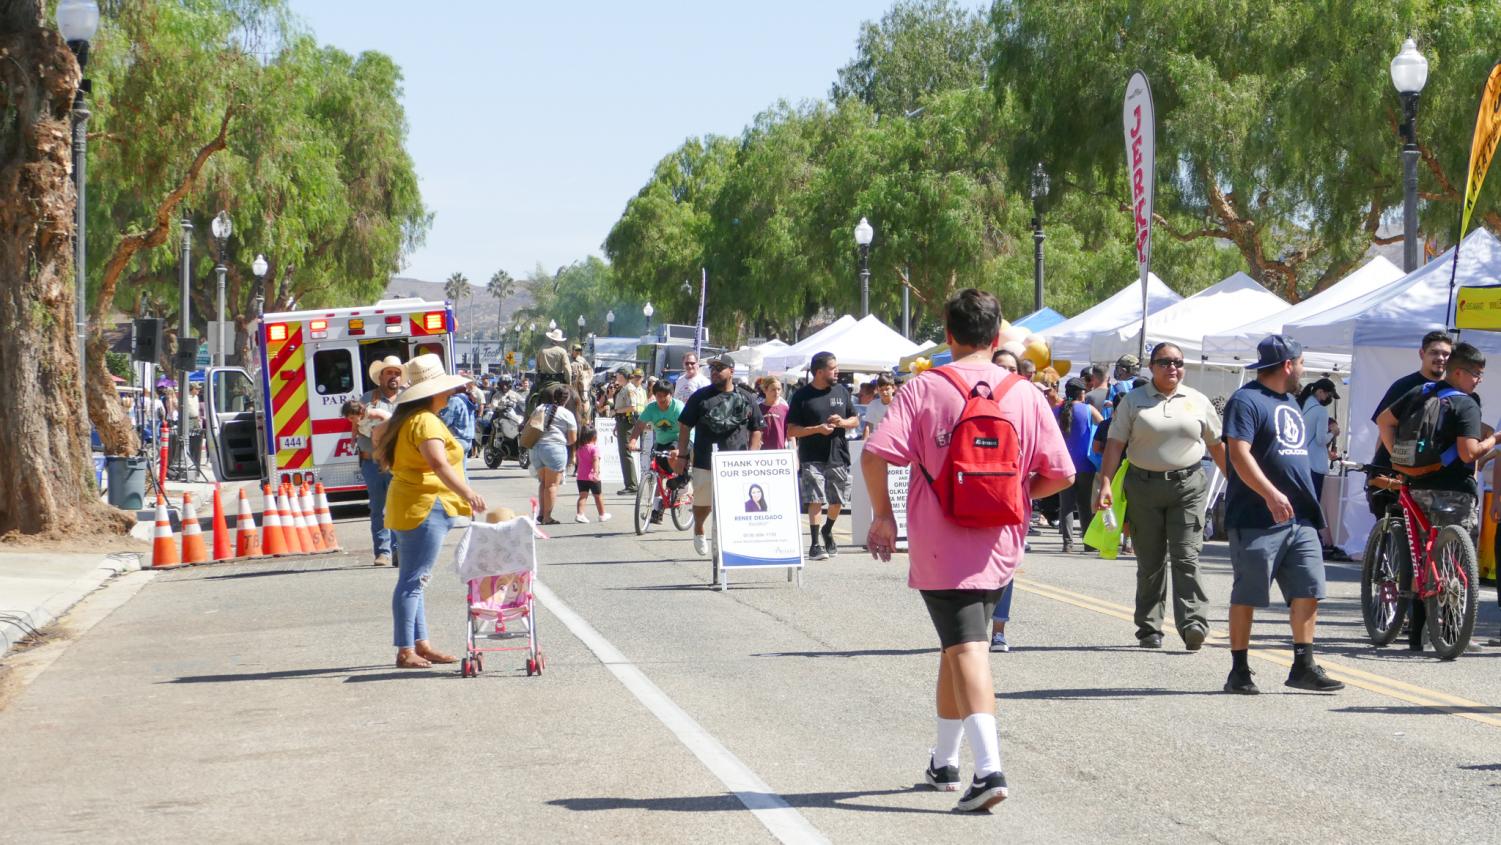 Crowds gather at the Moorpark Country Day parade on Saturday Oct. 2, 2021 in Moorpark, CA.